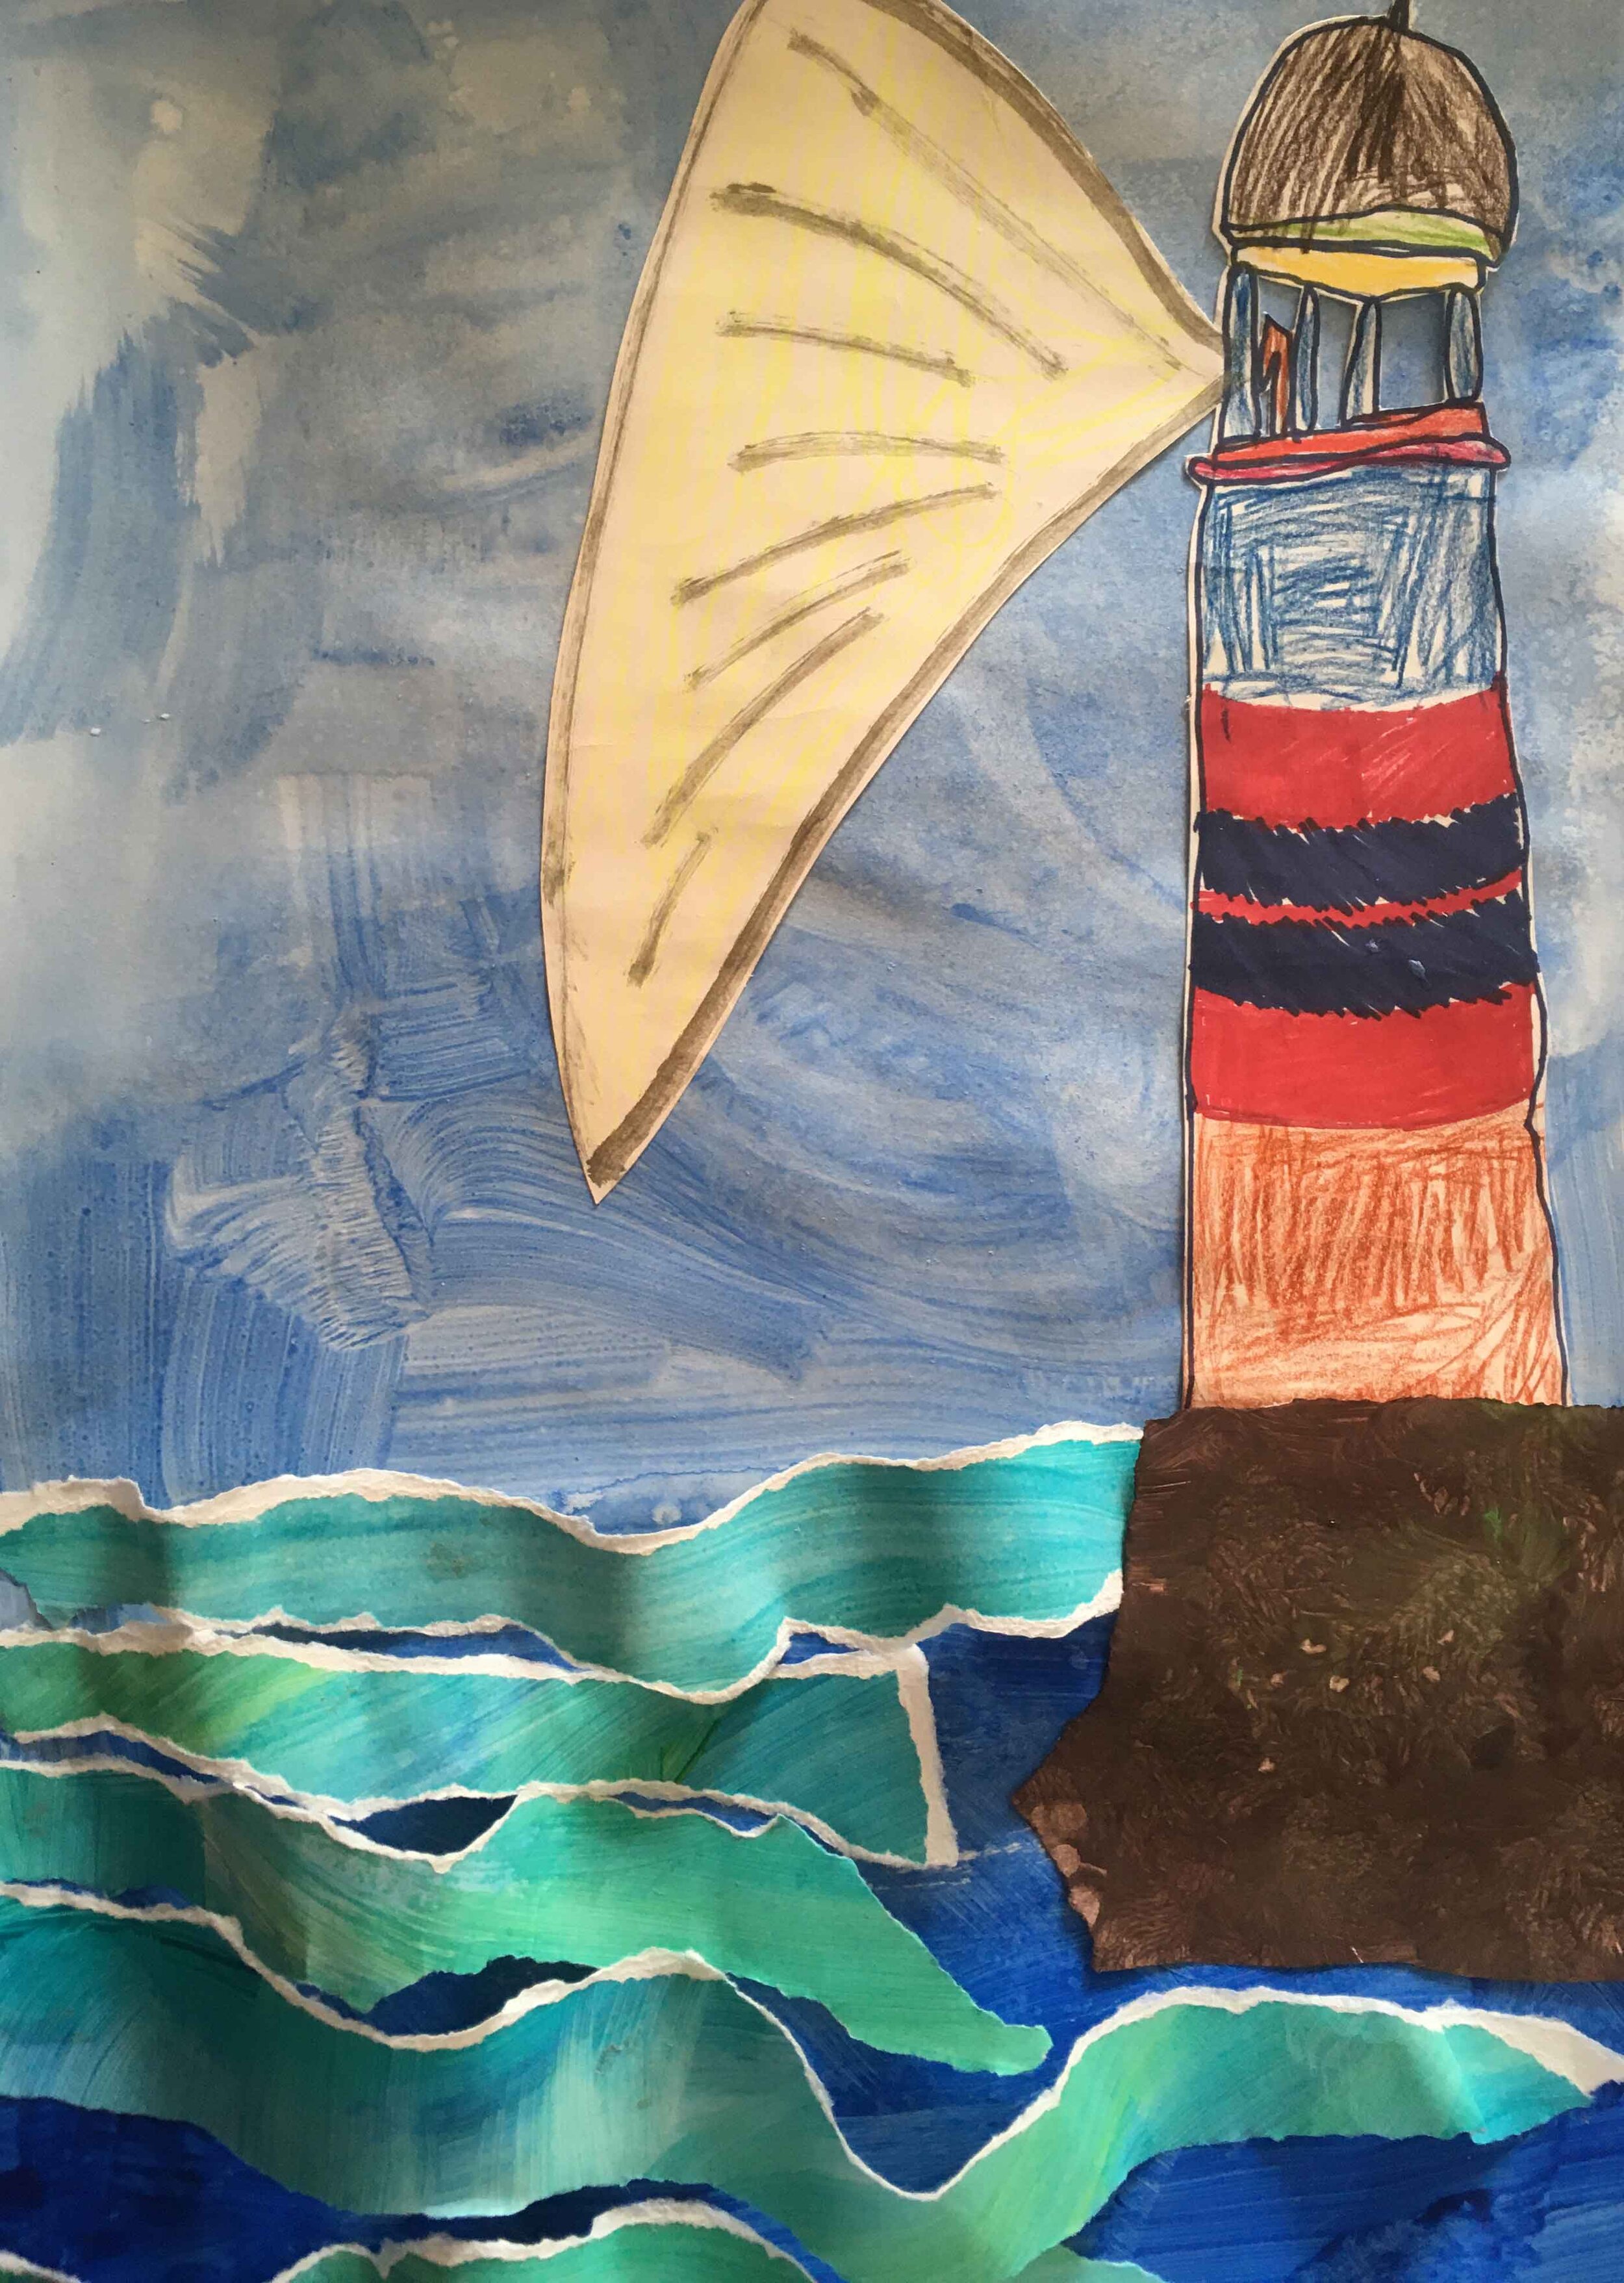 Lighthouse in a storm by Esme Jarvis age 4